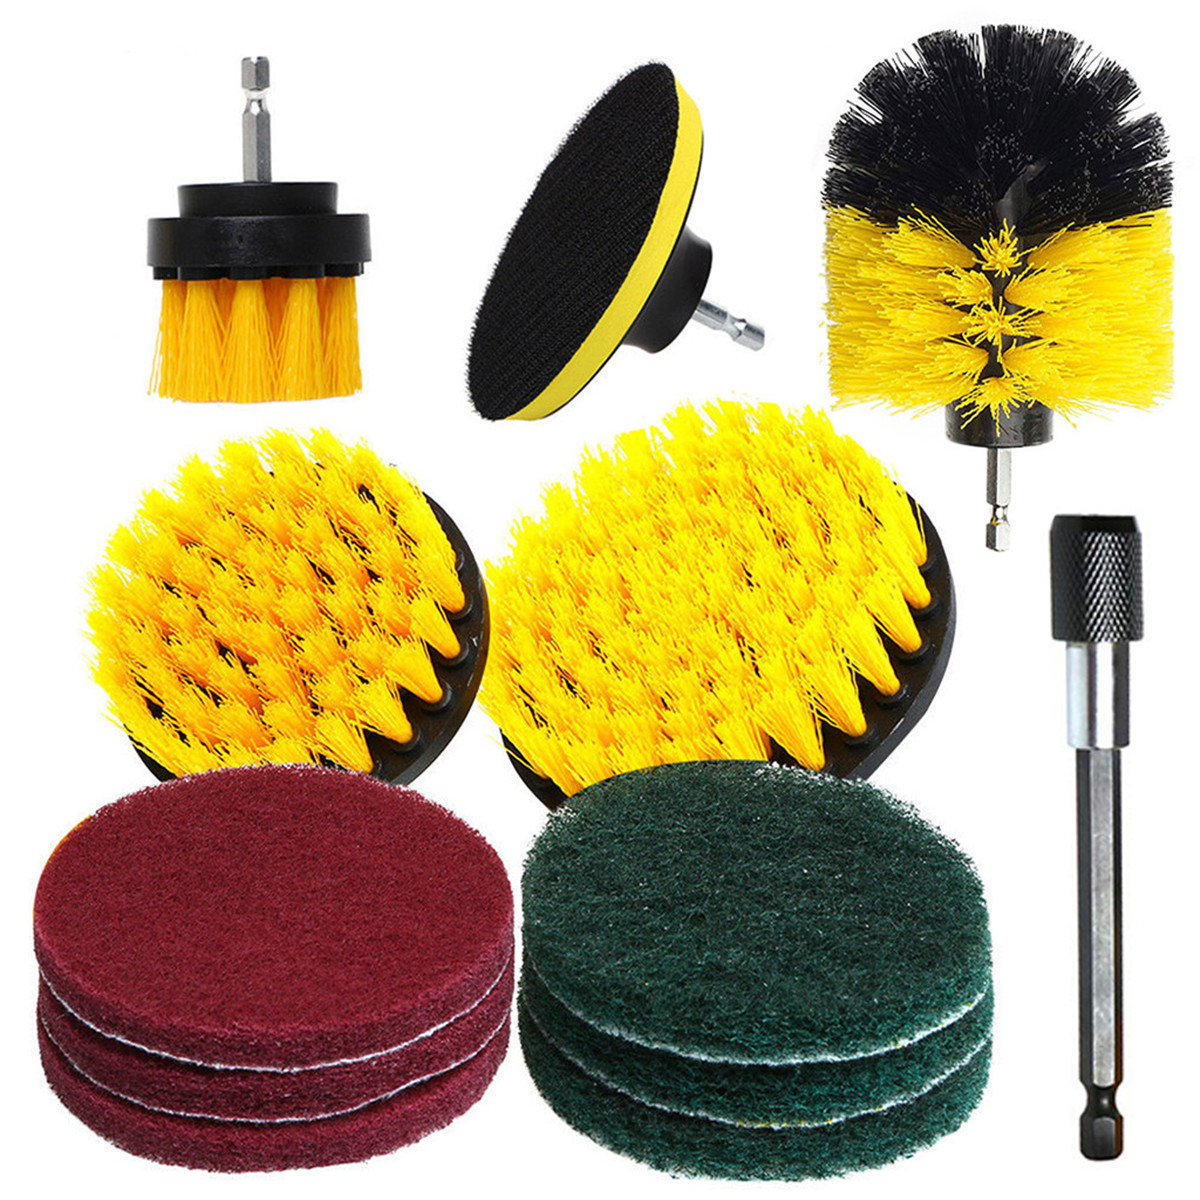 12Pcs-Drill-Brush-Set-Tub-Cleaner-Grout-Power-Scrubber-Cleaning-Attachments-Kit-1780037-6